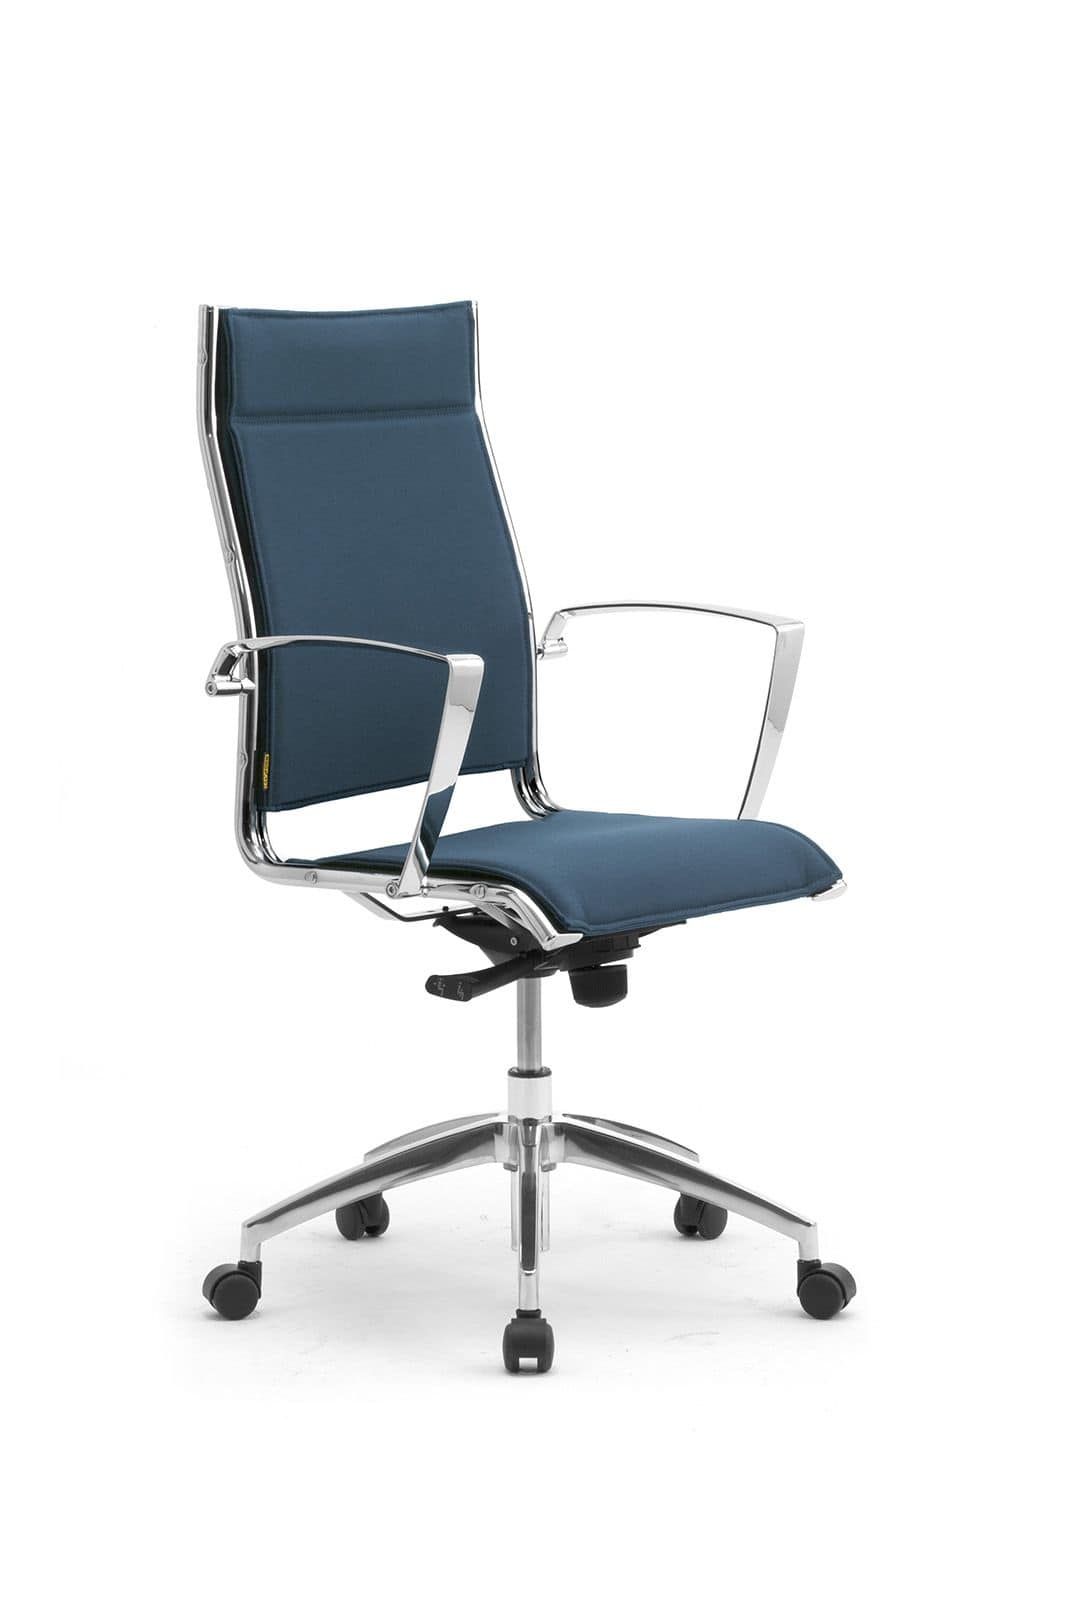 Office chair with breathable mesh and fabric - Leyform